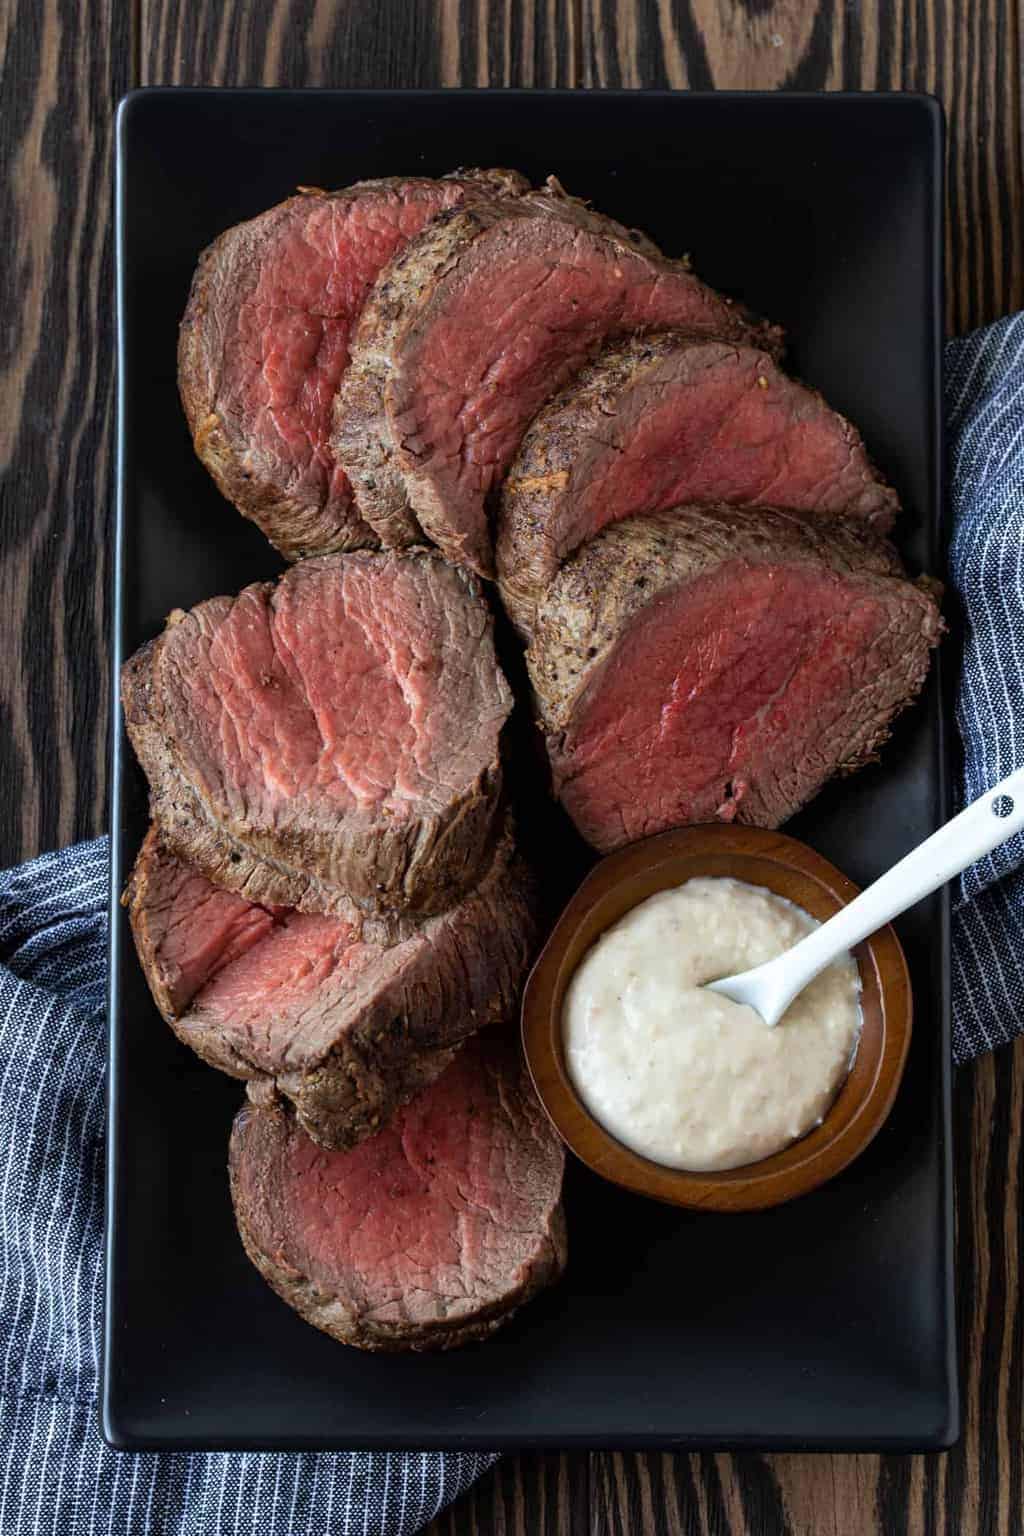 Sliced beef tenderloin on a platter with creamy horseradish for serving.